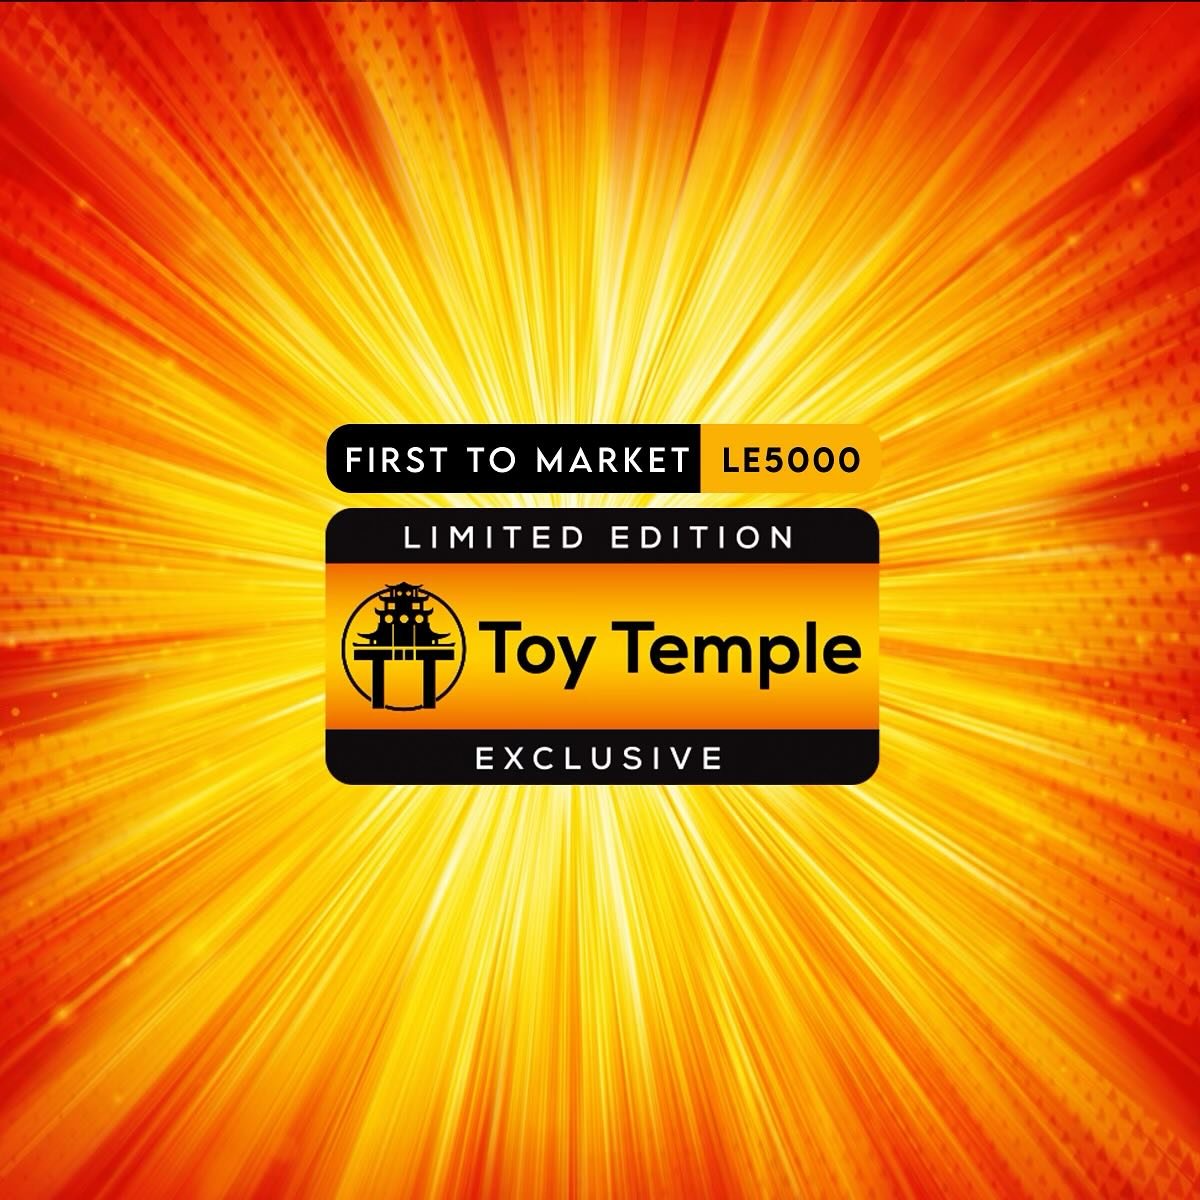 Toytemple about to release an exclusive soon.
The first 5000 preorders comes first o market LE 5000 sticker.

#Funkos #Funkopop #Collectibles #Collectible #Popholmes #Funkonews #Funkopopnews #Funkopopvinyl #Funkopops #Popvinyl #Funkofamily #Funkomania #Funkocollector #Toys